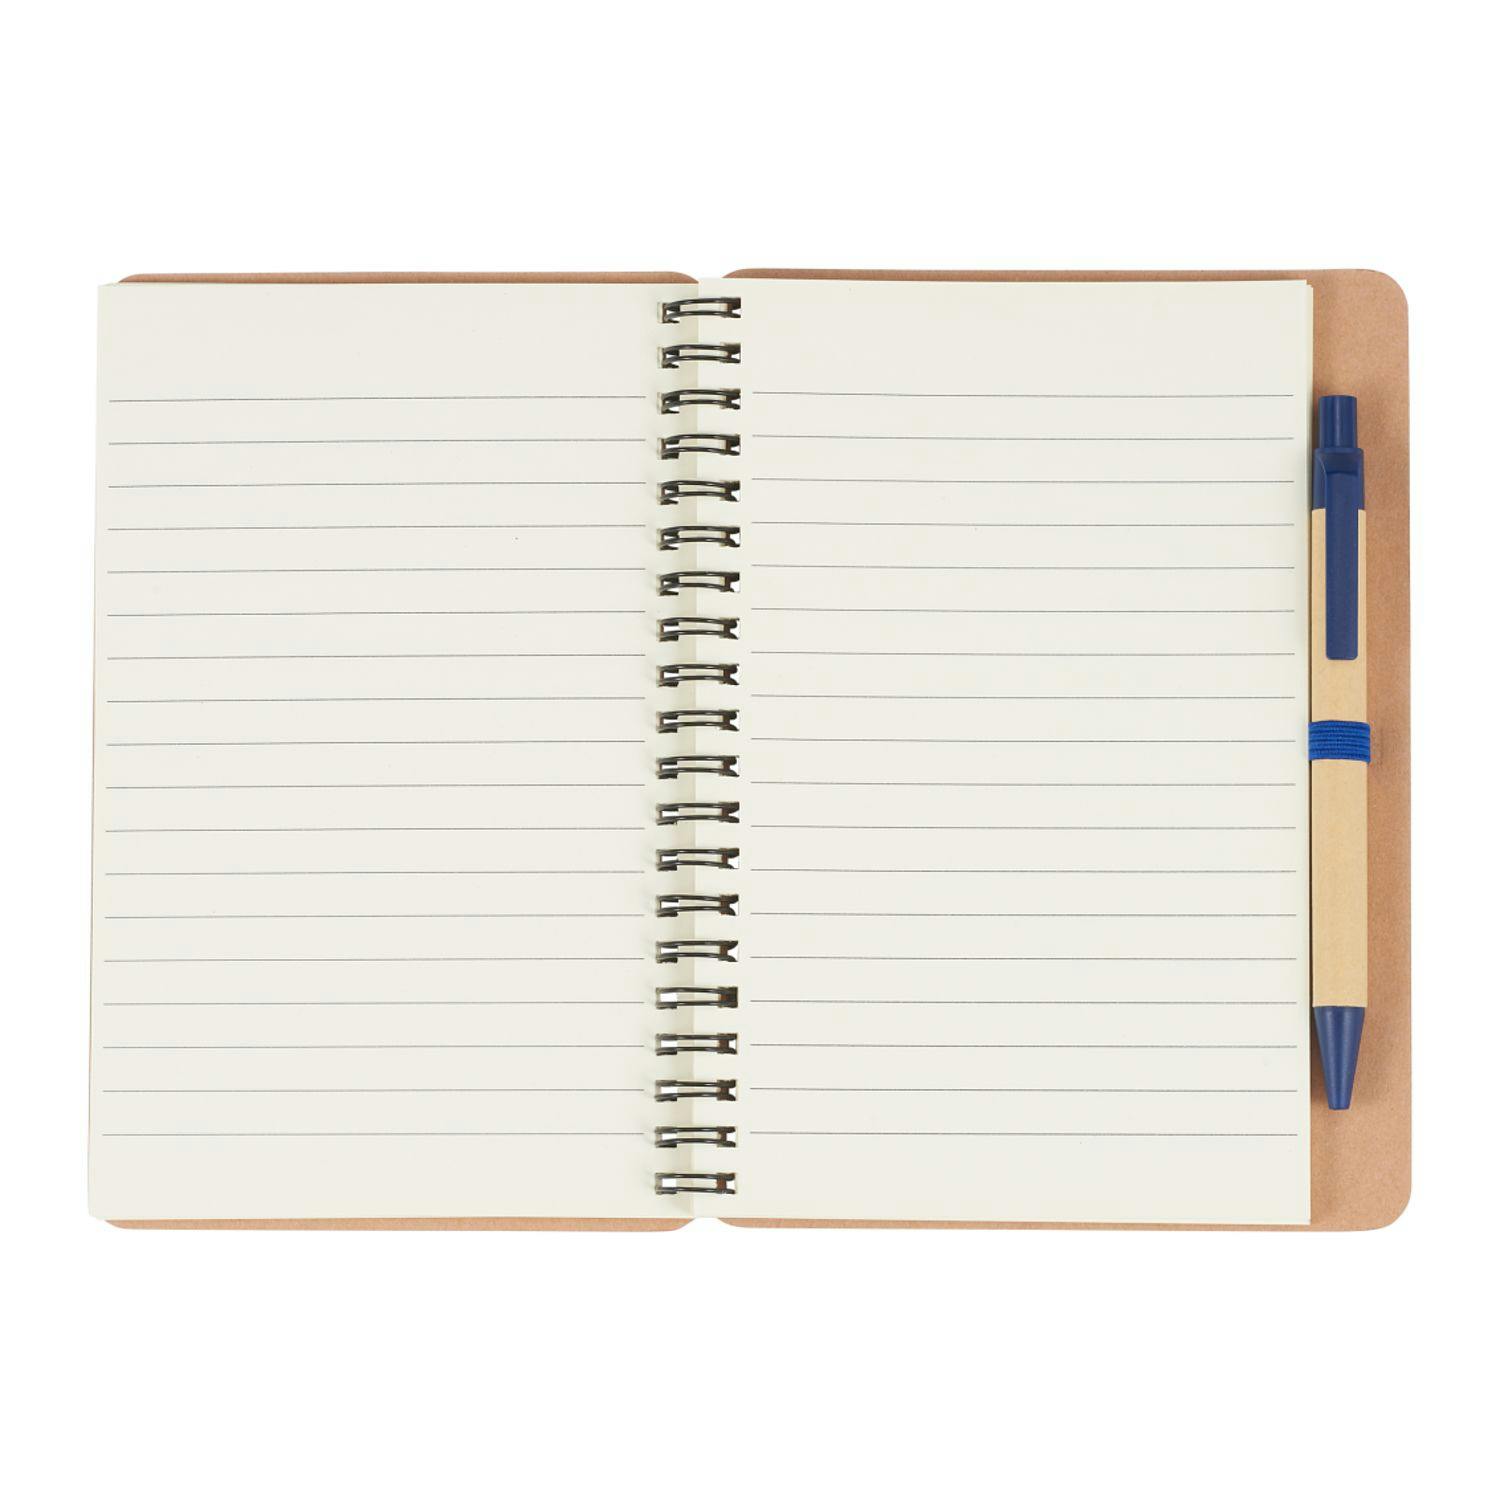 5" x 7" Eco Spiral Notebook with Pen - additional Image 3